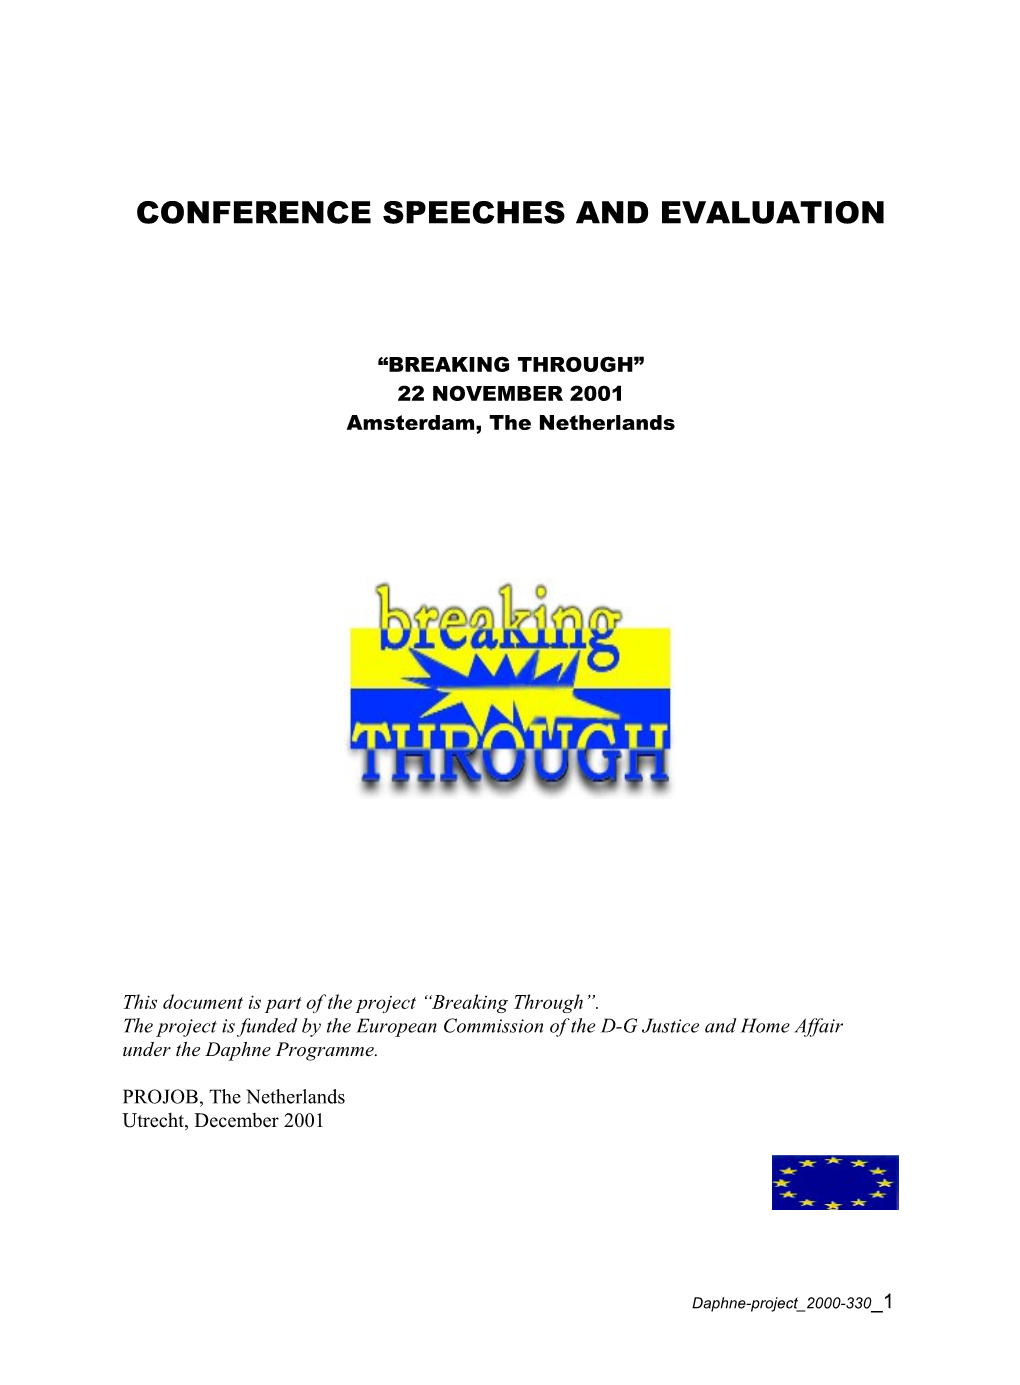 Conference Speeches and Evaluation